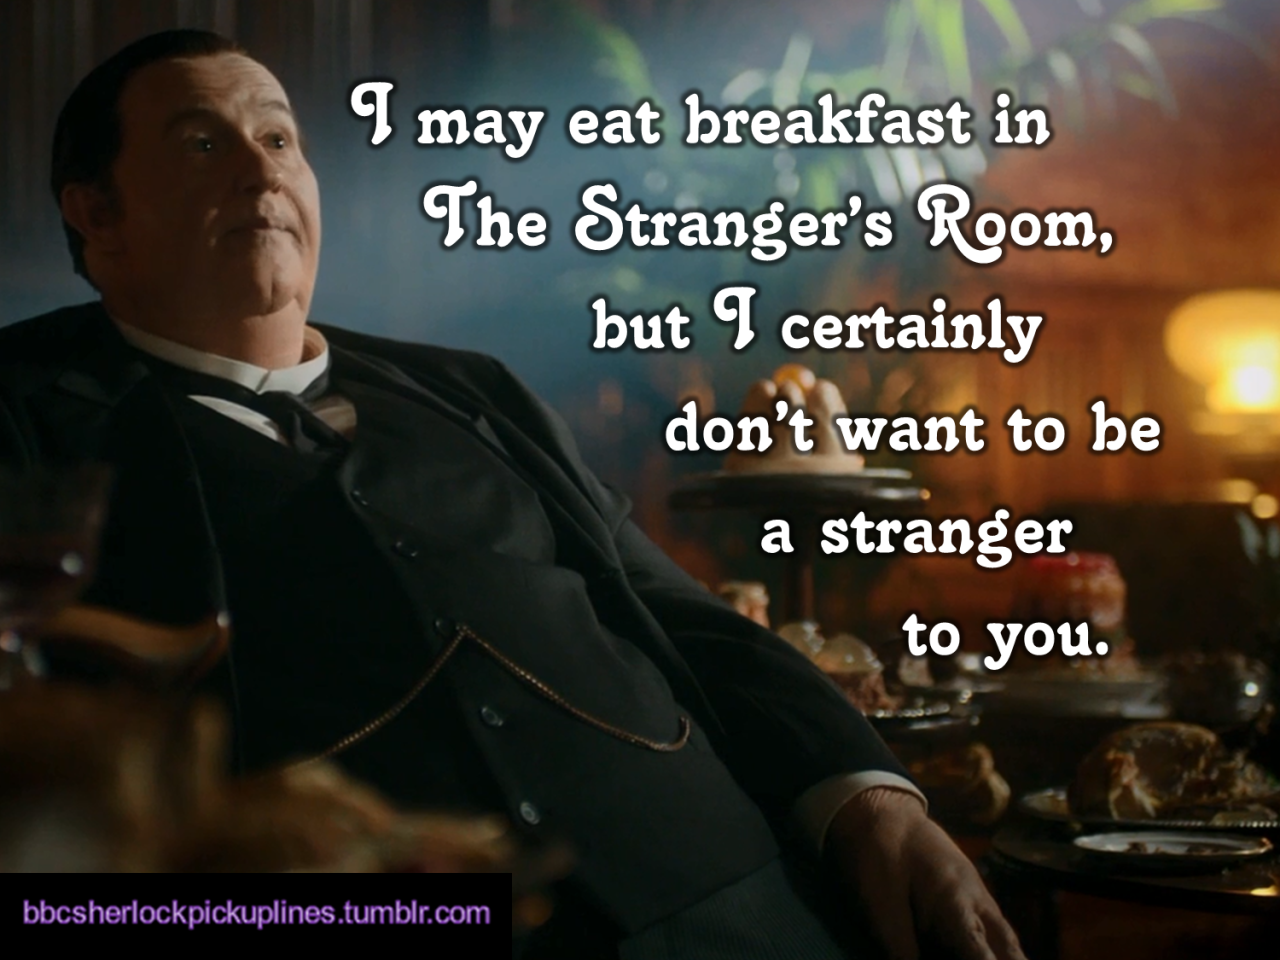 â€œI may eat breakfast in The Strangerâ€™s Room, but I certainly donâ€™t